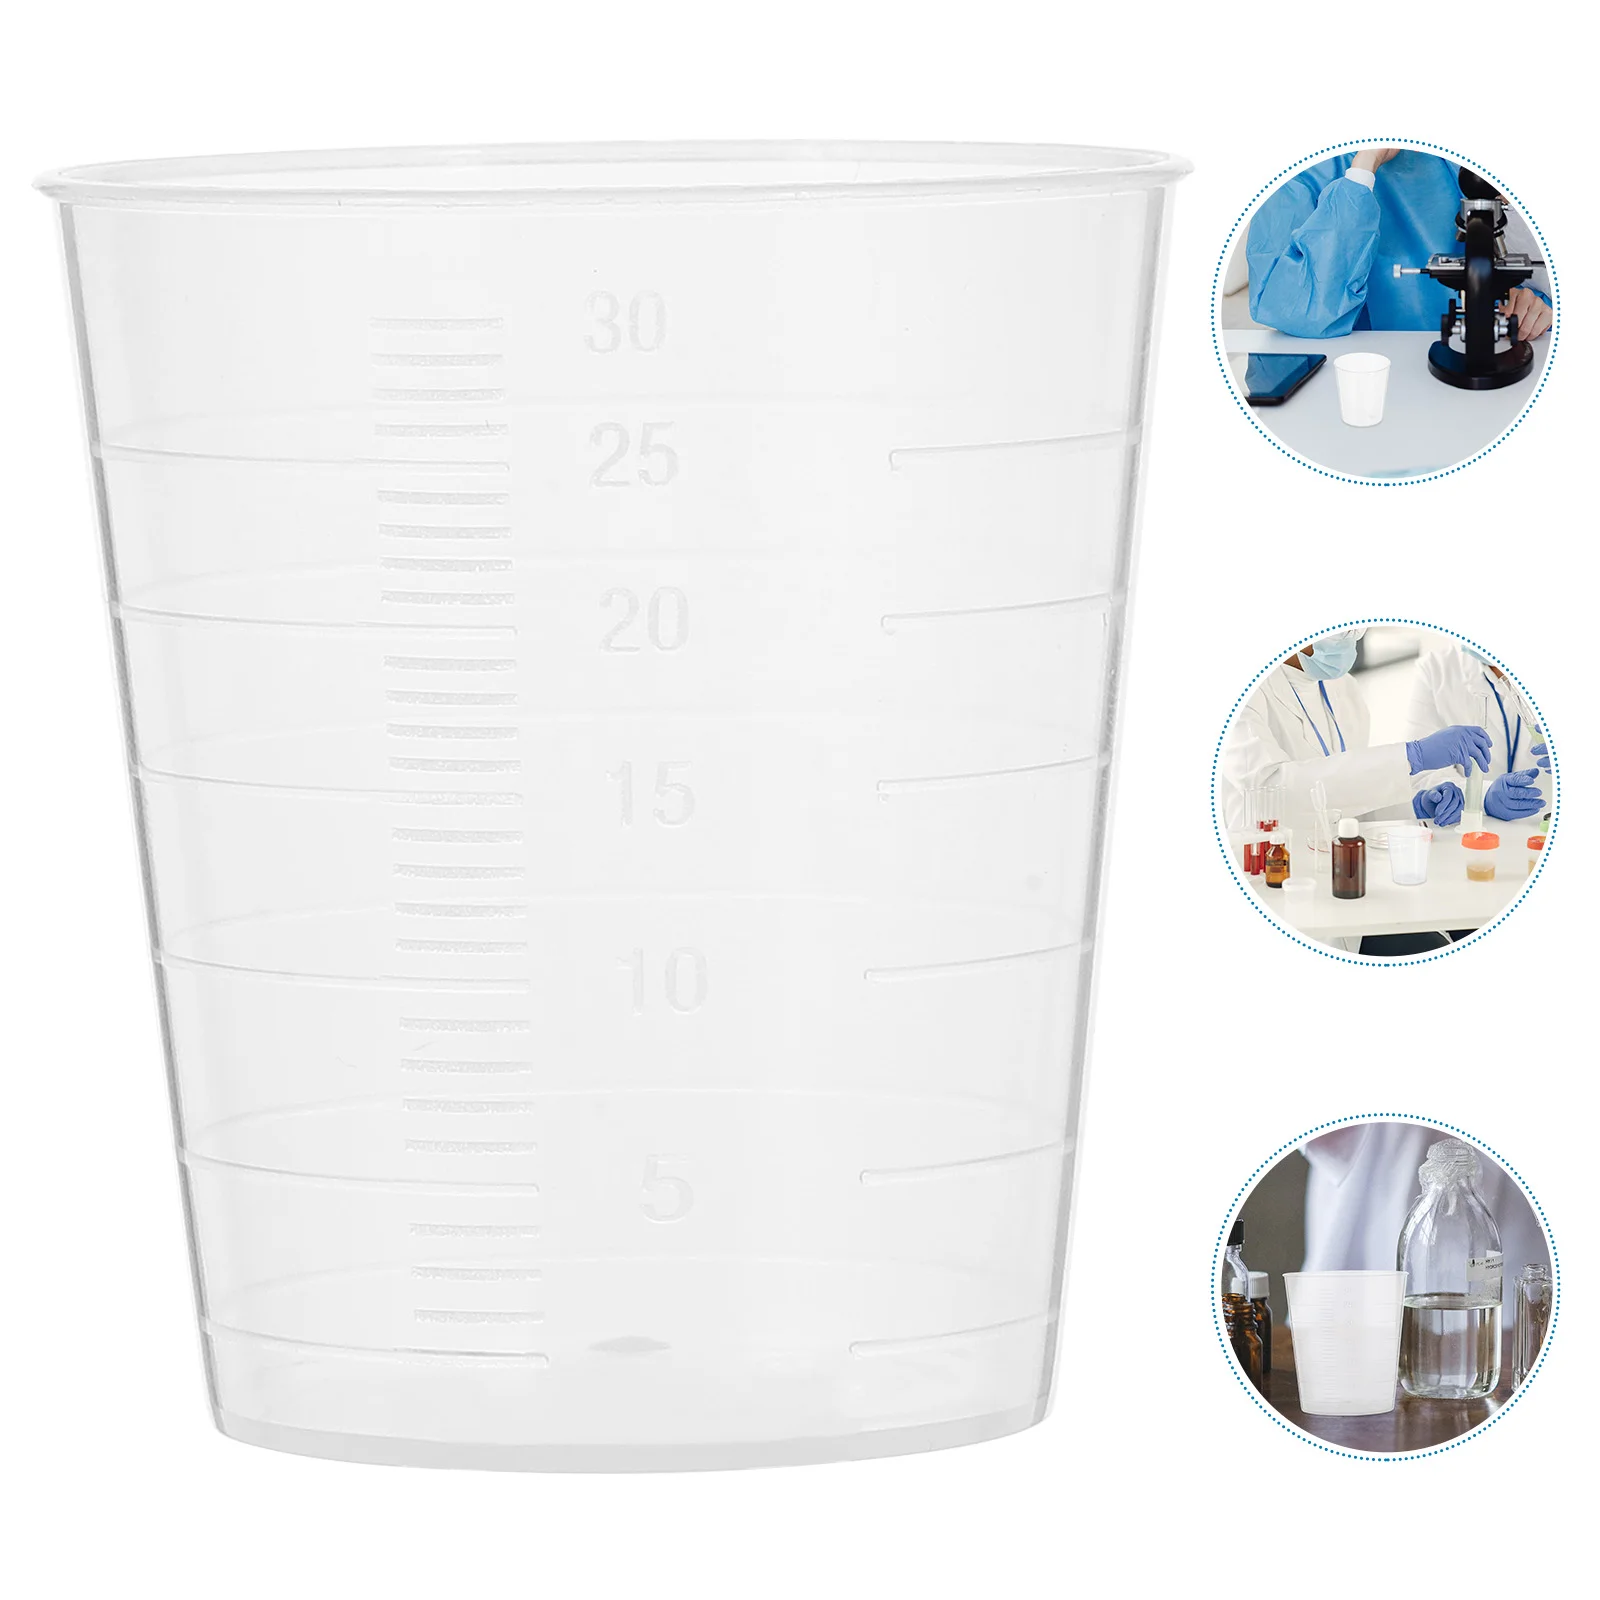 

100pcs 30ml Measuring Cups with Scale Clear Graduated Cups for Mixing Stain Epoxy Resin Container